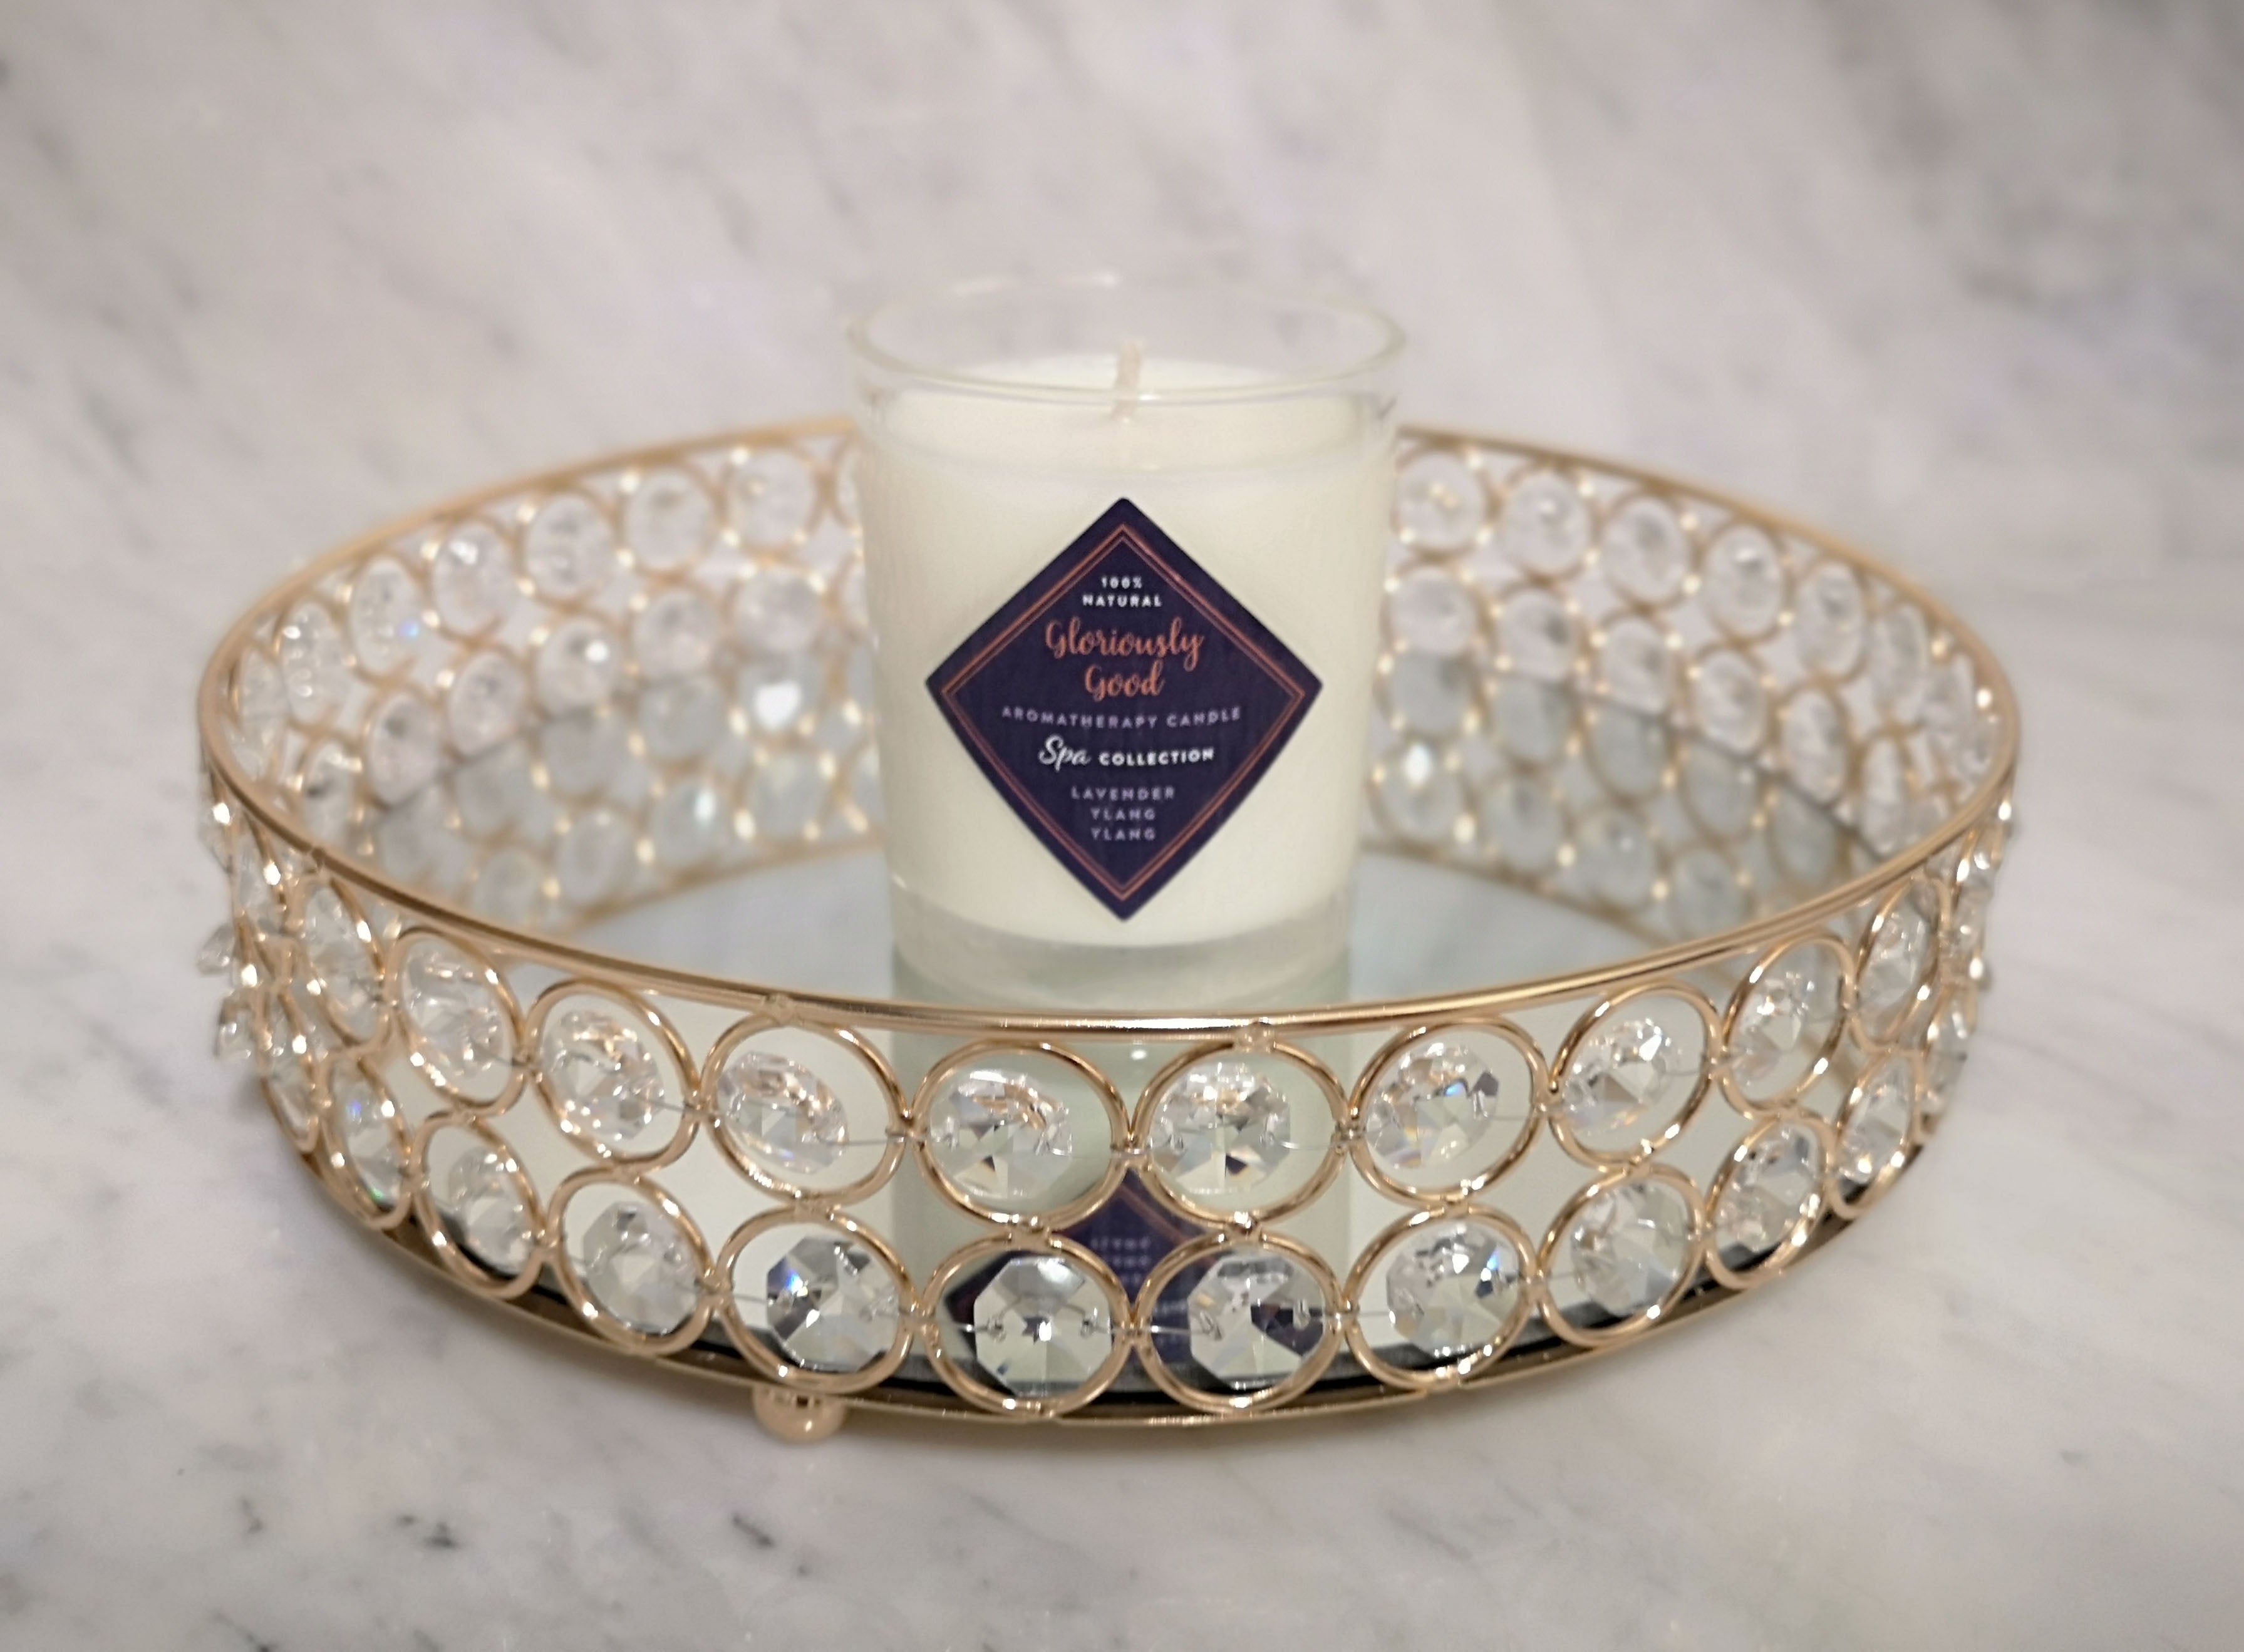 Lavender and Ylang Ylang aromatherapy candle on mirror decorative tray with crystals